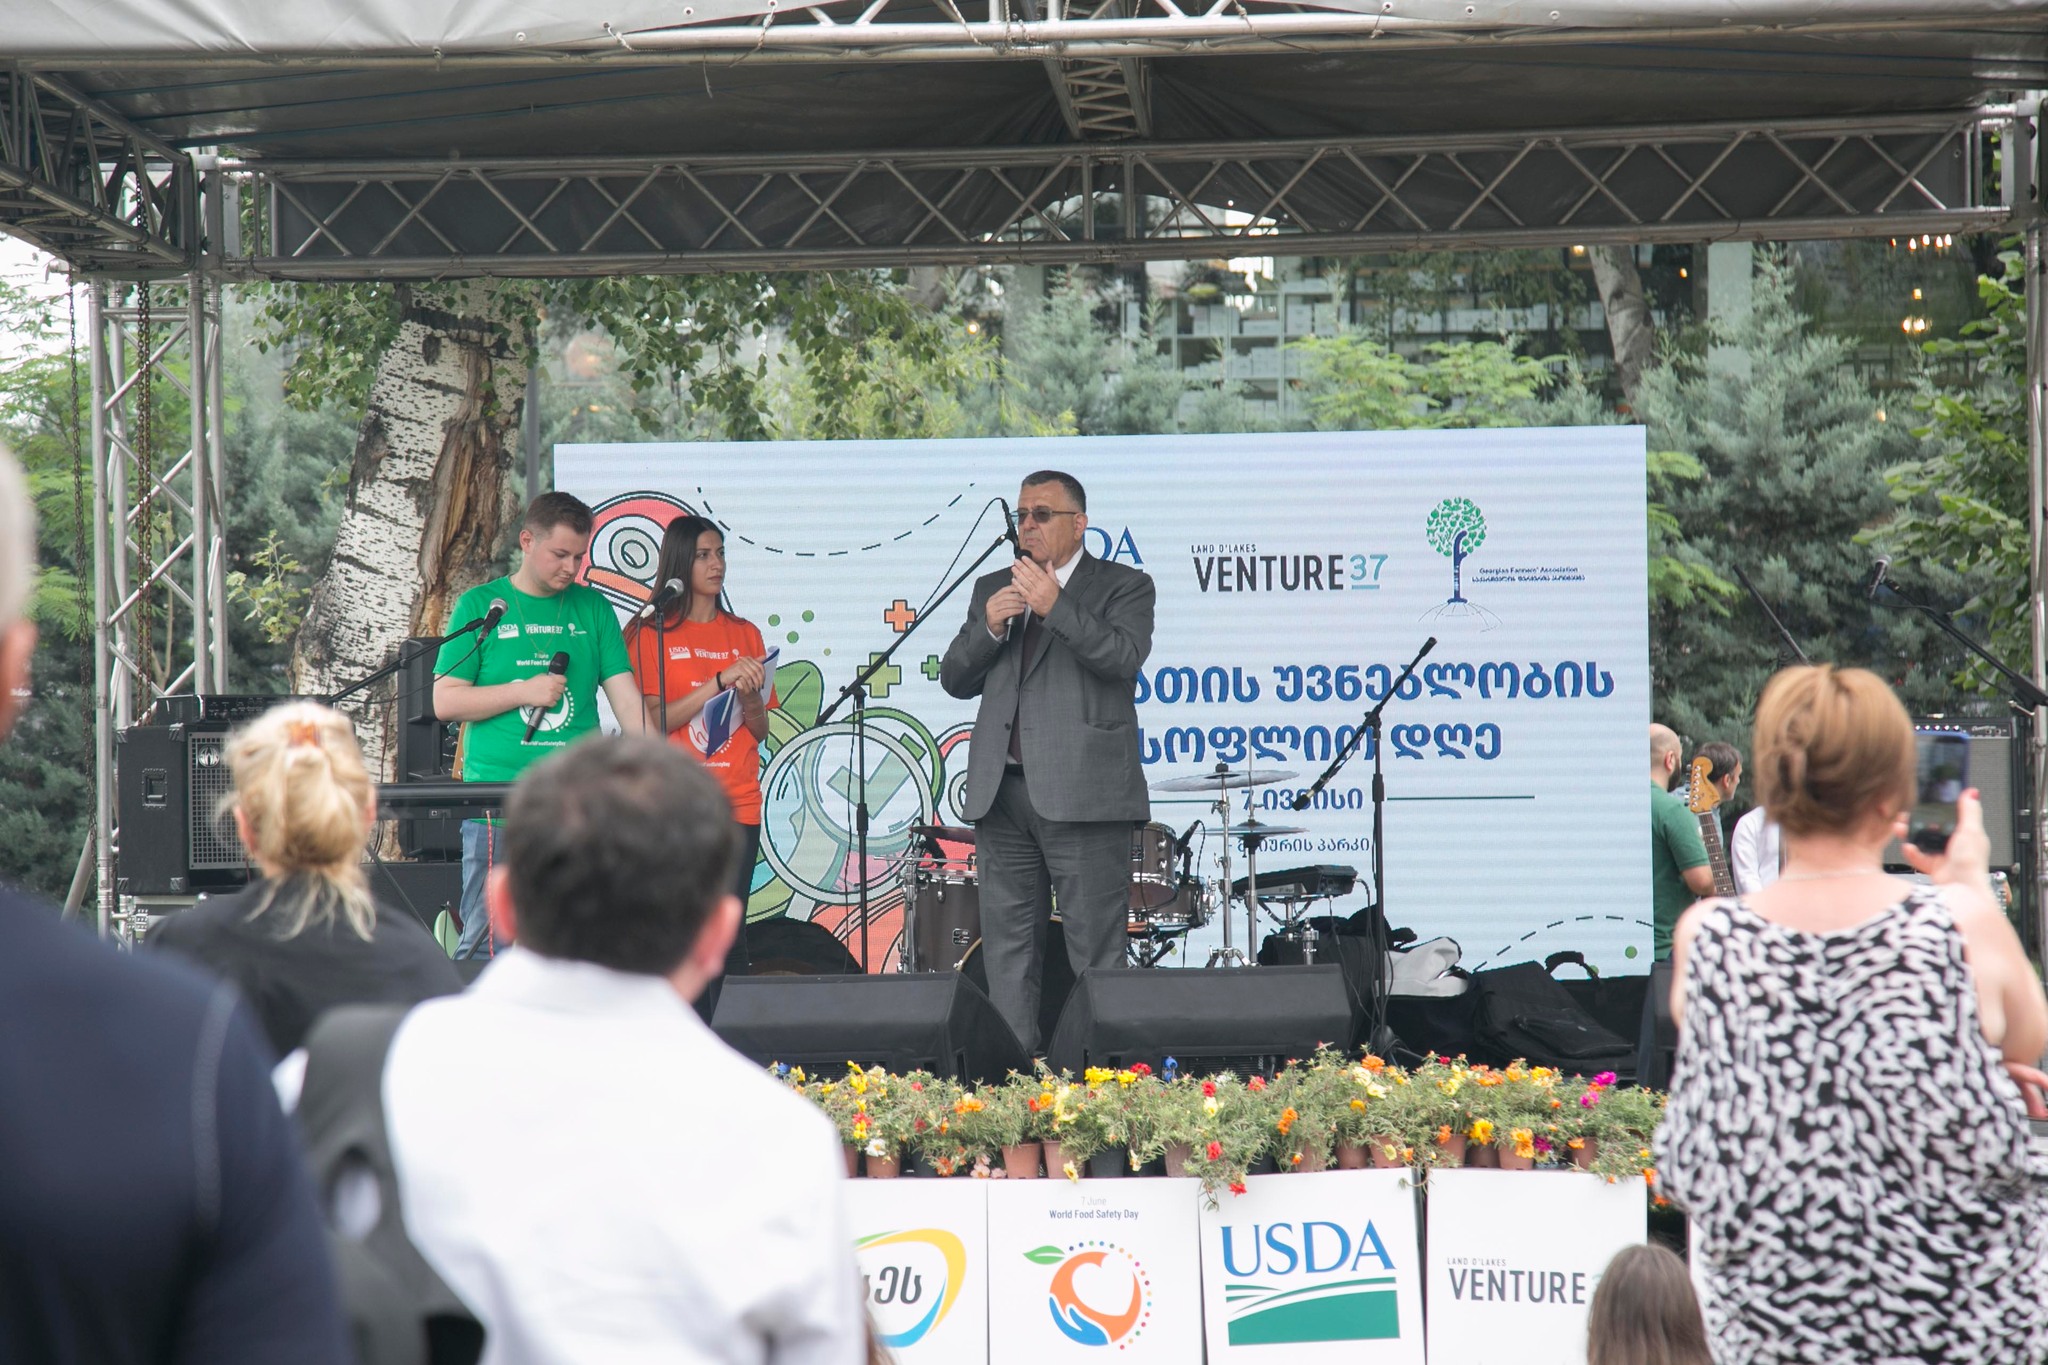 World Food Safety Day was celebrated in Georgia on June 7